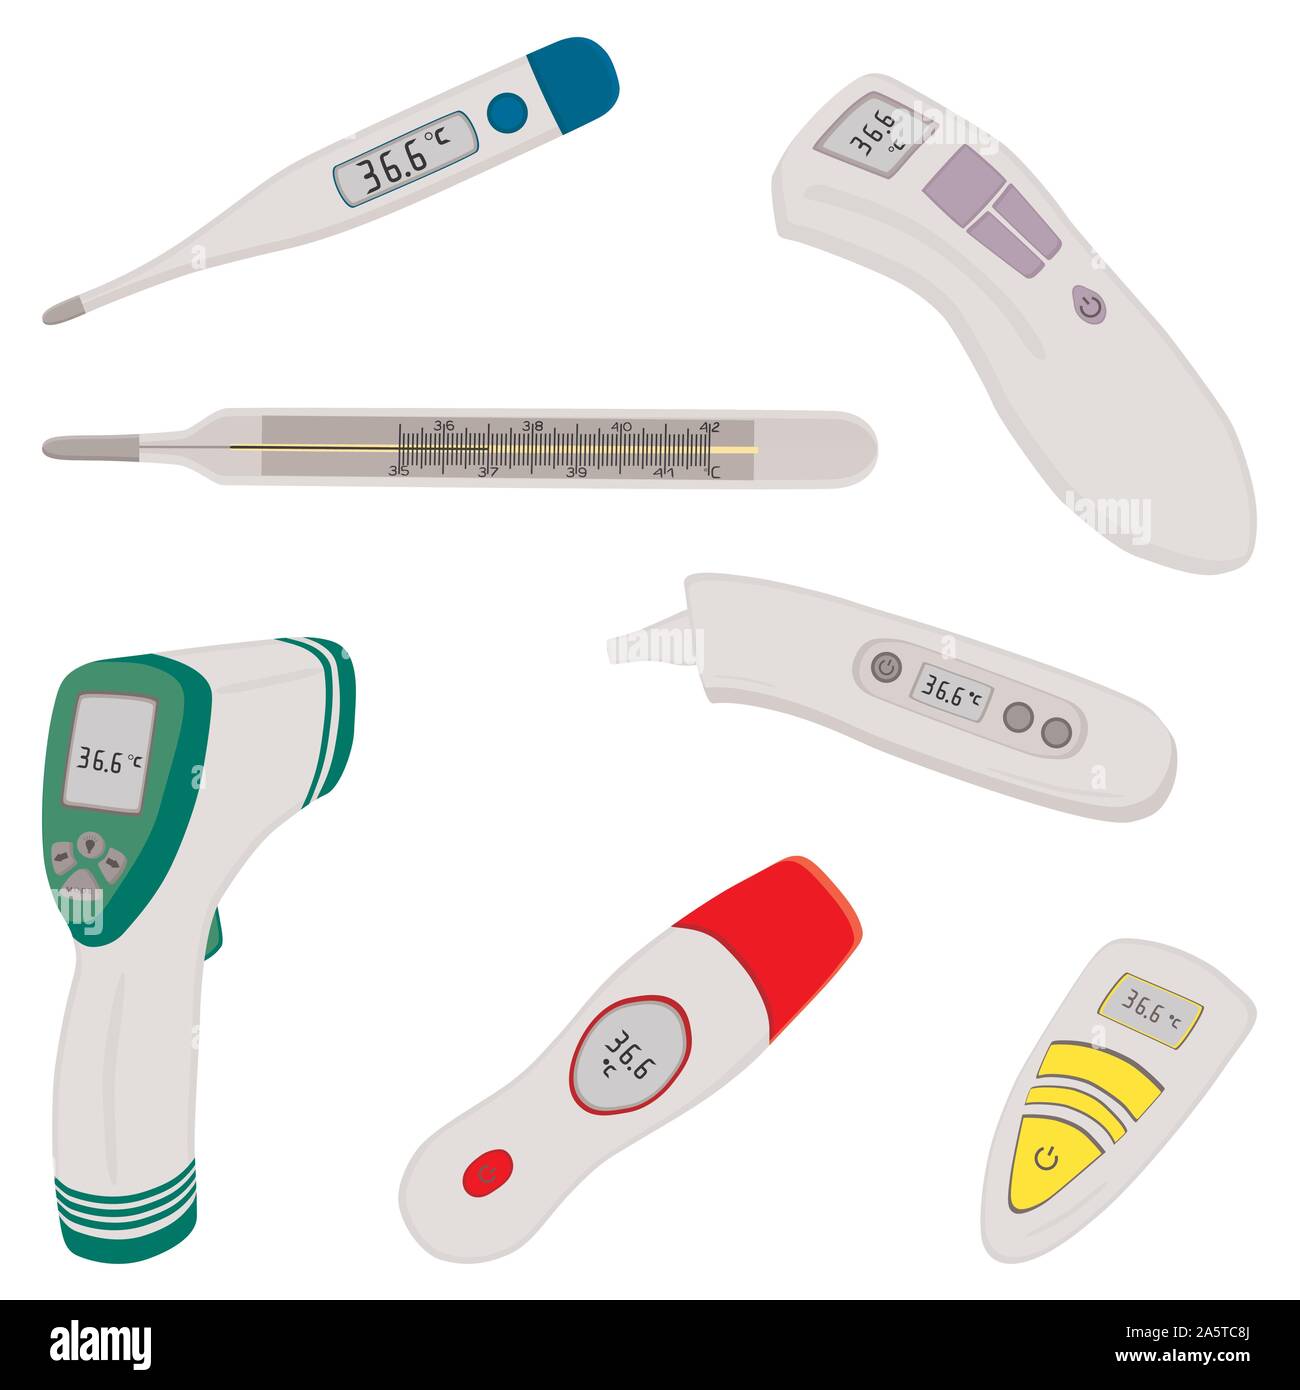 https://c8.alamy.com/comp/2A5TC8J/illustration-on-theme-big-colored-set-different-types-of-thermometers-for-hospital-thermometer-consisting-of-collection-accessory-with-quality-contro-2A5TC8J.jpg